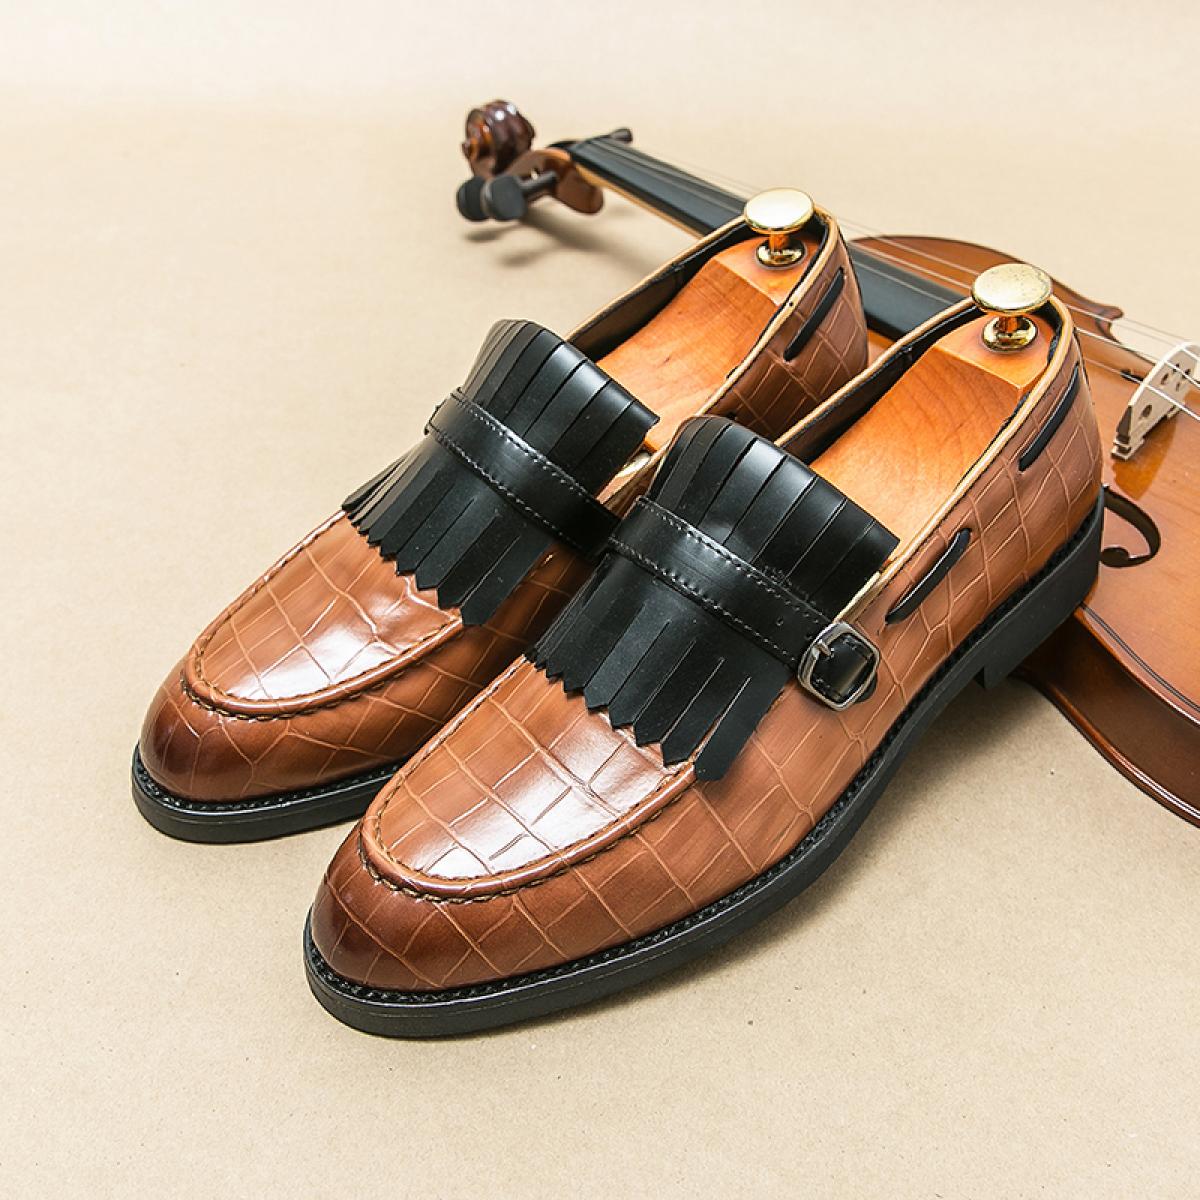 New Green Men Loafers Square Toe Slip On Tassels Brown Crocodile Pattern Business Formal Shoes Size 38 48 Free Shipping